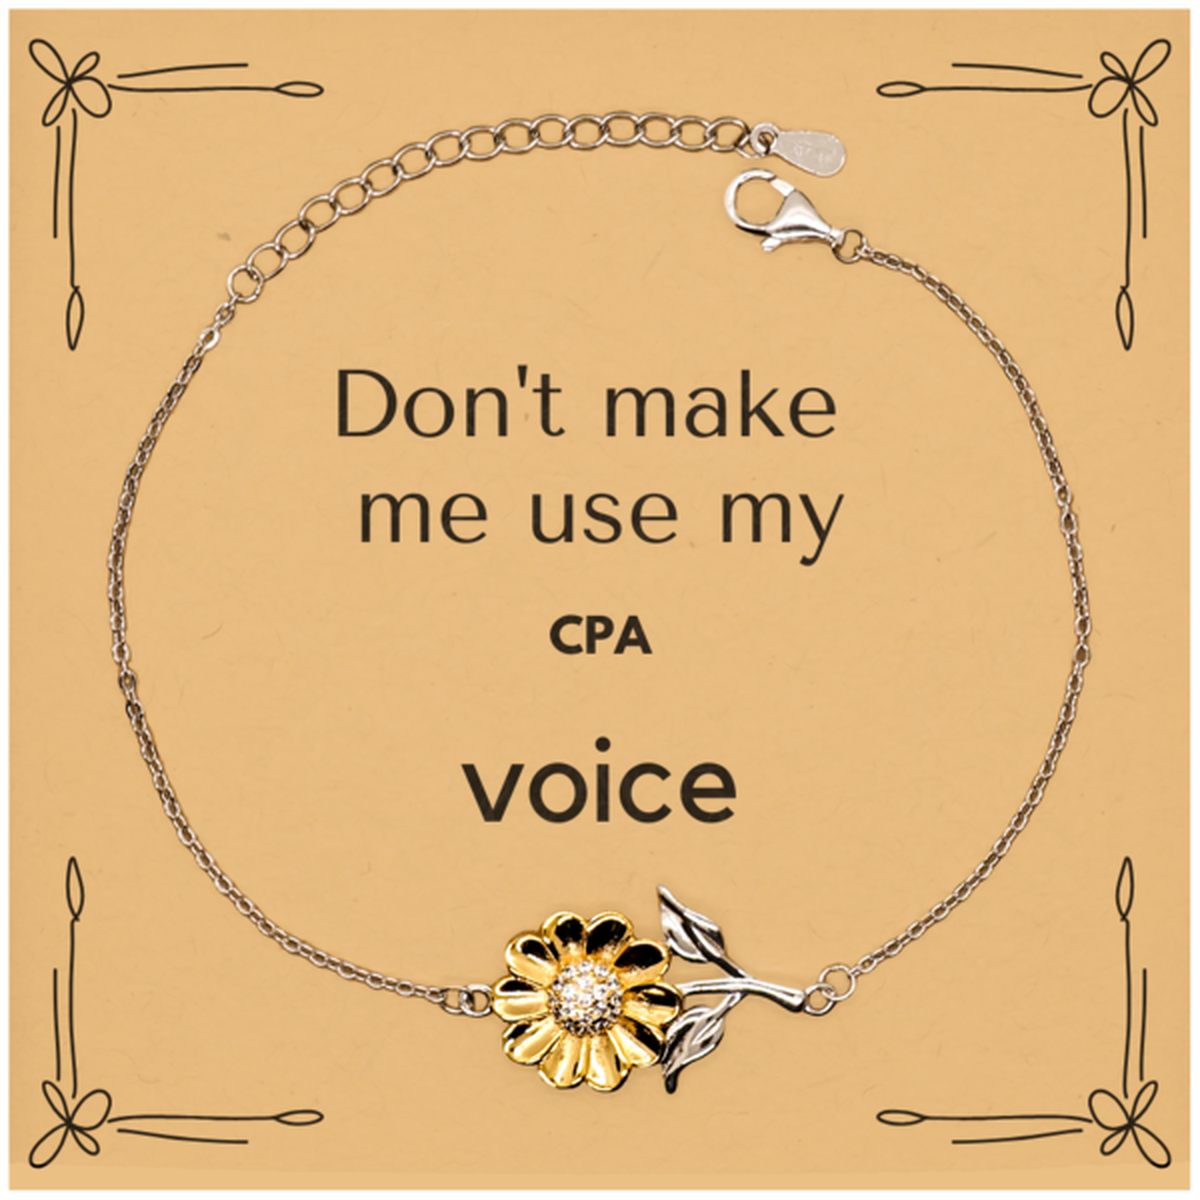 Don't make me use my CPA voice, Sarcasm CPA Card Gifts, Christmas CPA Sunflower Bracelet Birthday Unique Gifts For CPA Coworkers, Men, Women, Colleague, Friends